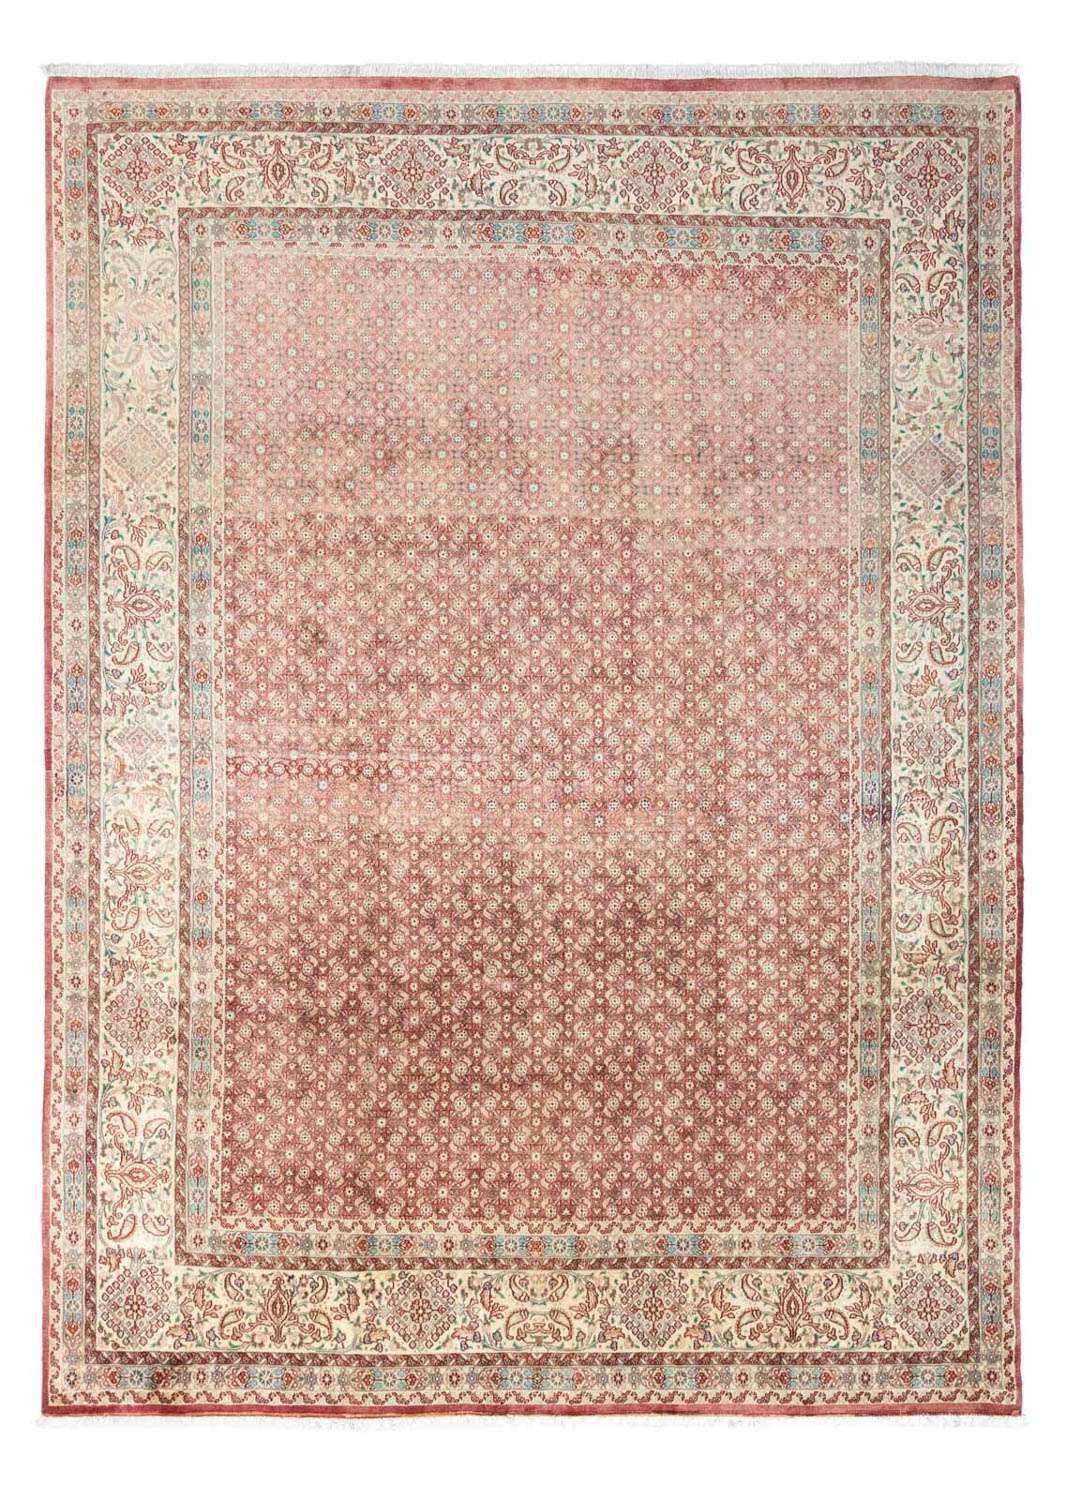 Perser Rug - Classic - 335 x 248 cm - light red